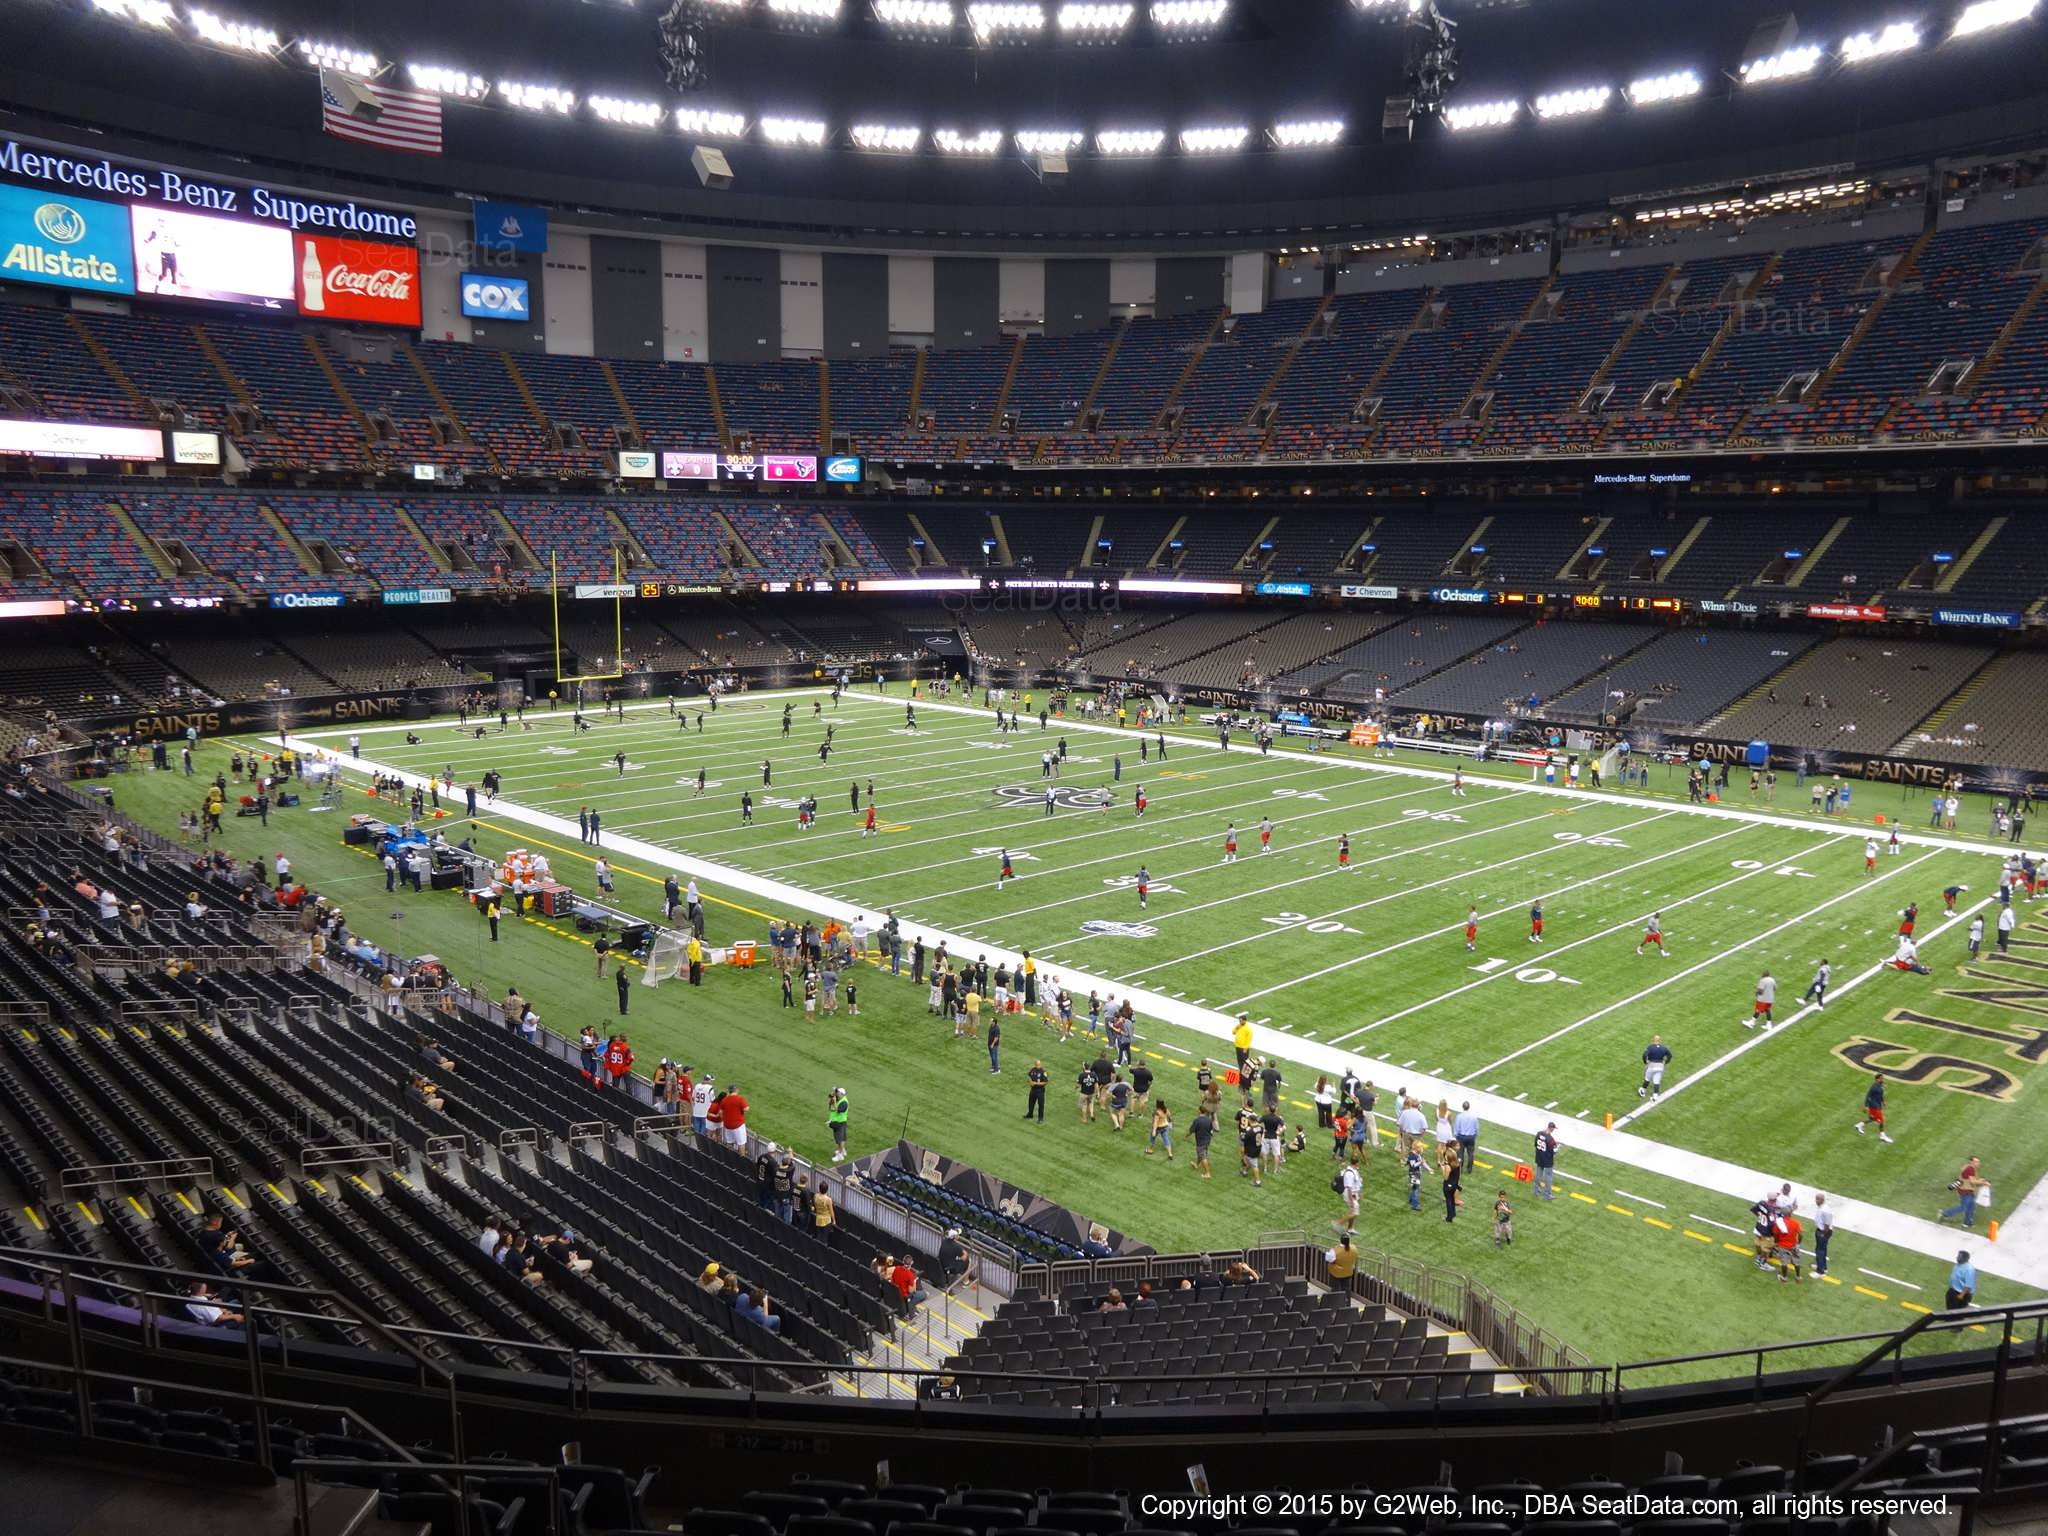 Seat view from section 306 at the Mercedes-Benz Superdome, home of the New Orleans Saints